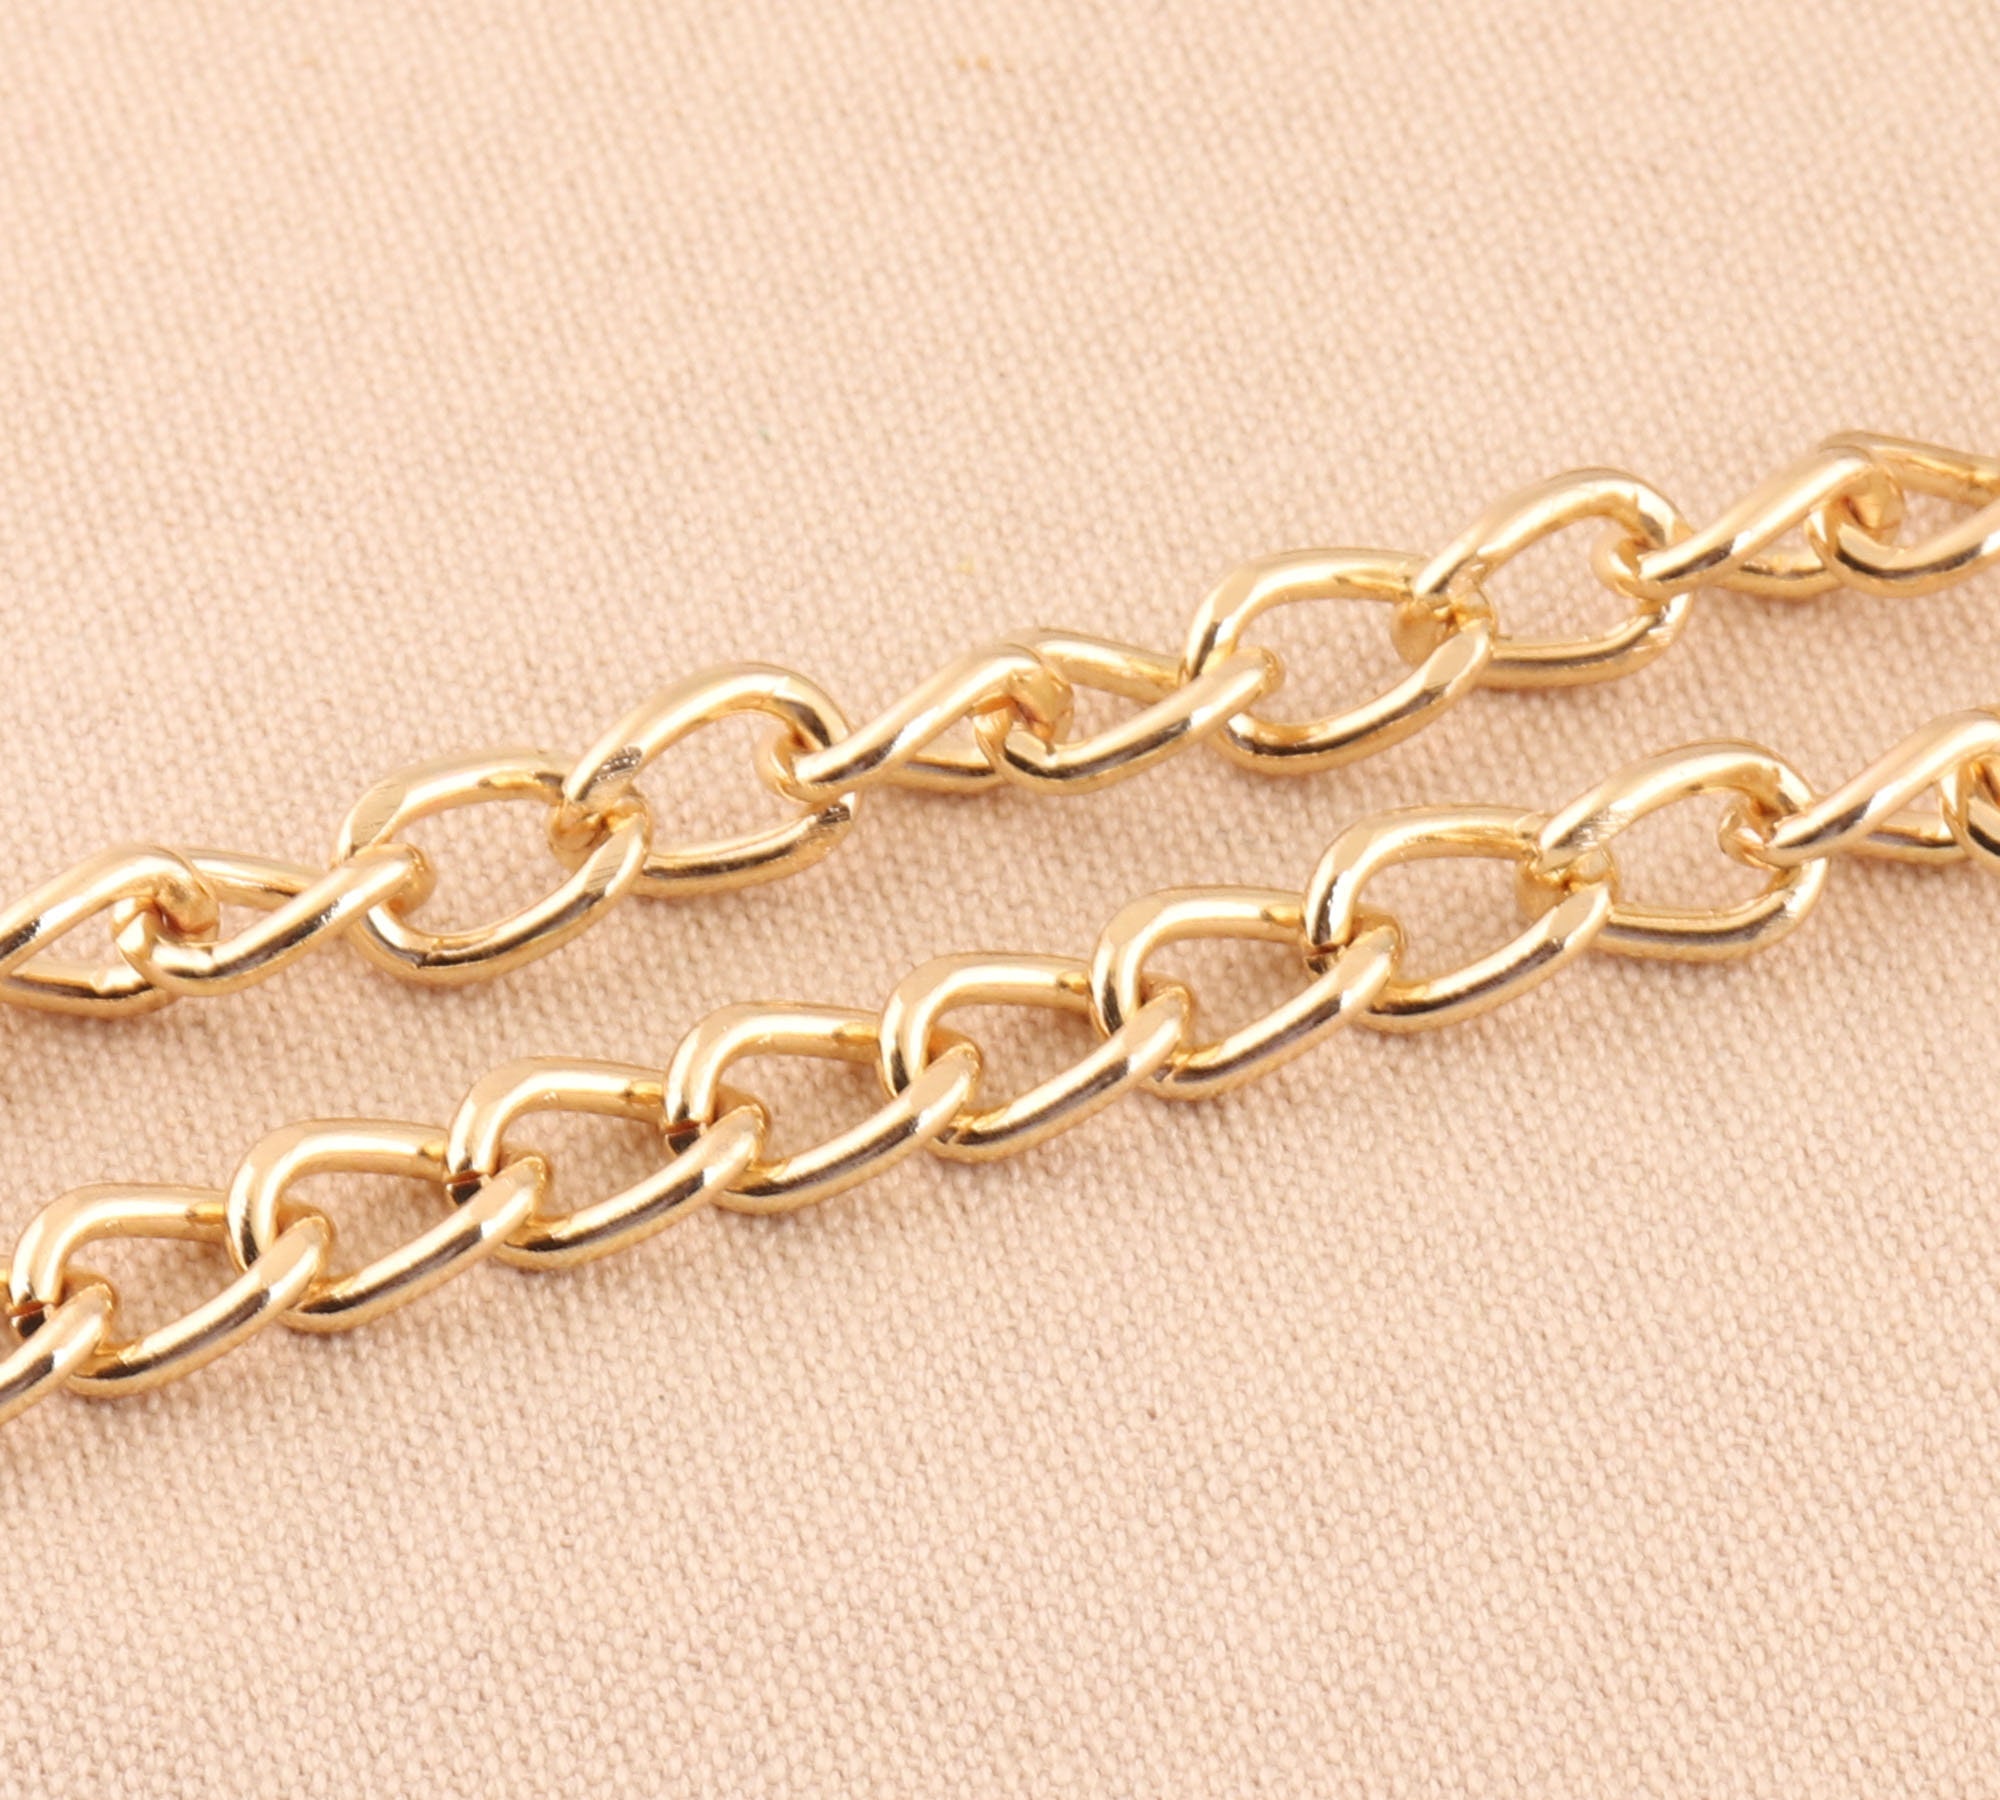 Small Beads Square Shape Tiny Beads 2mm Gold Beads for Necklace